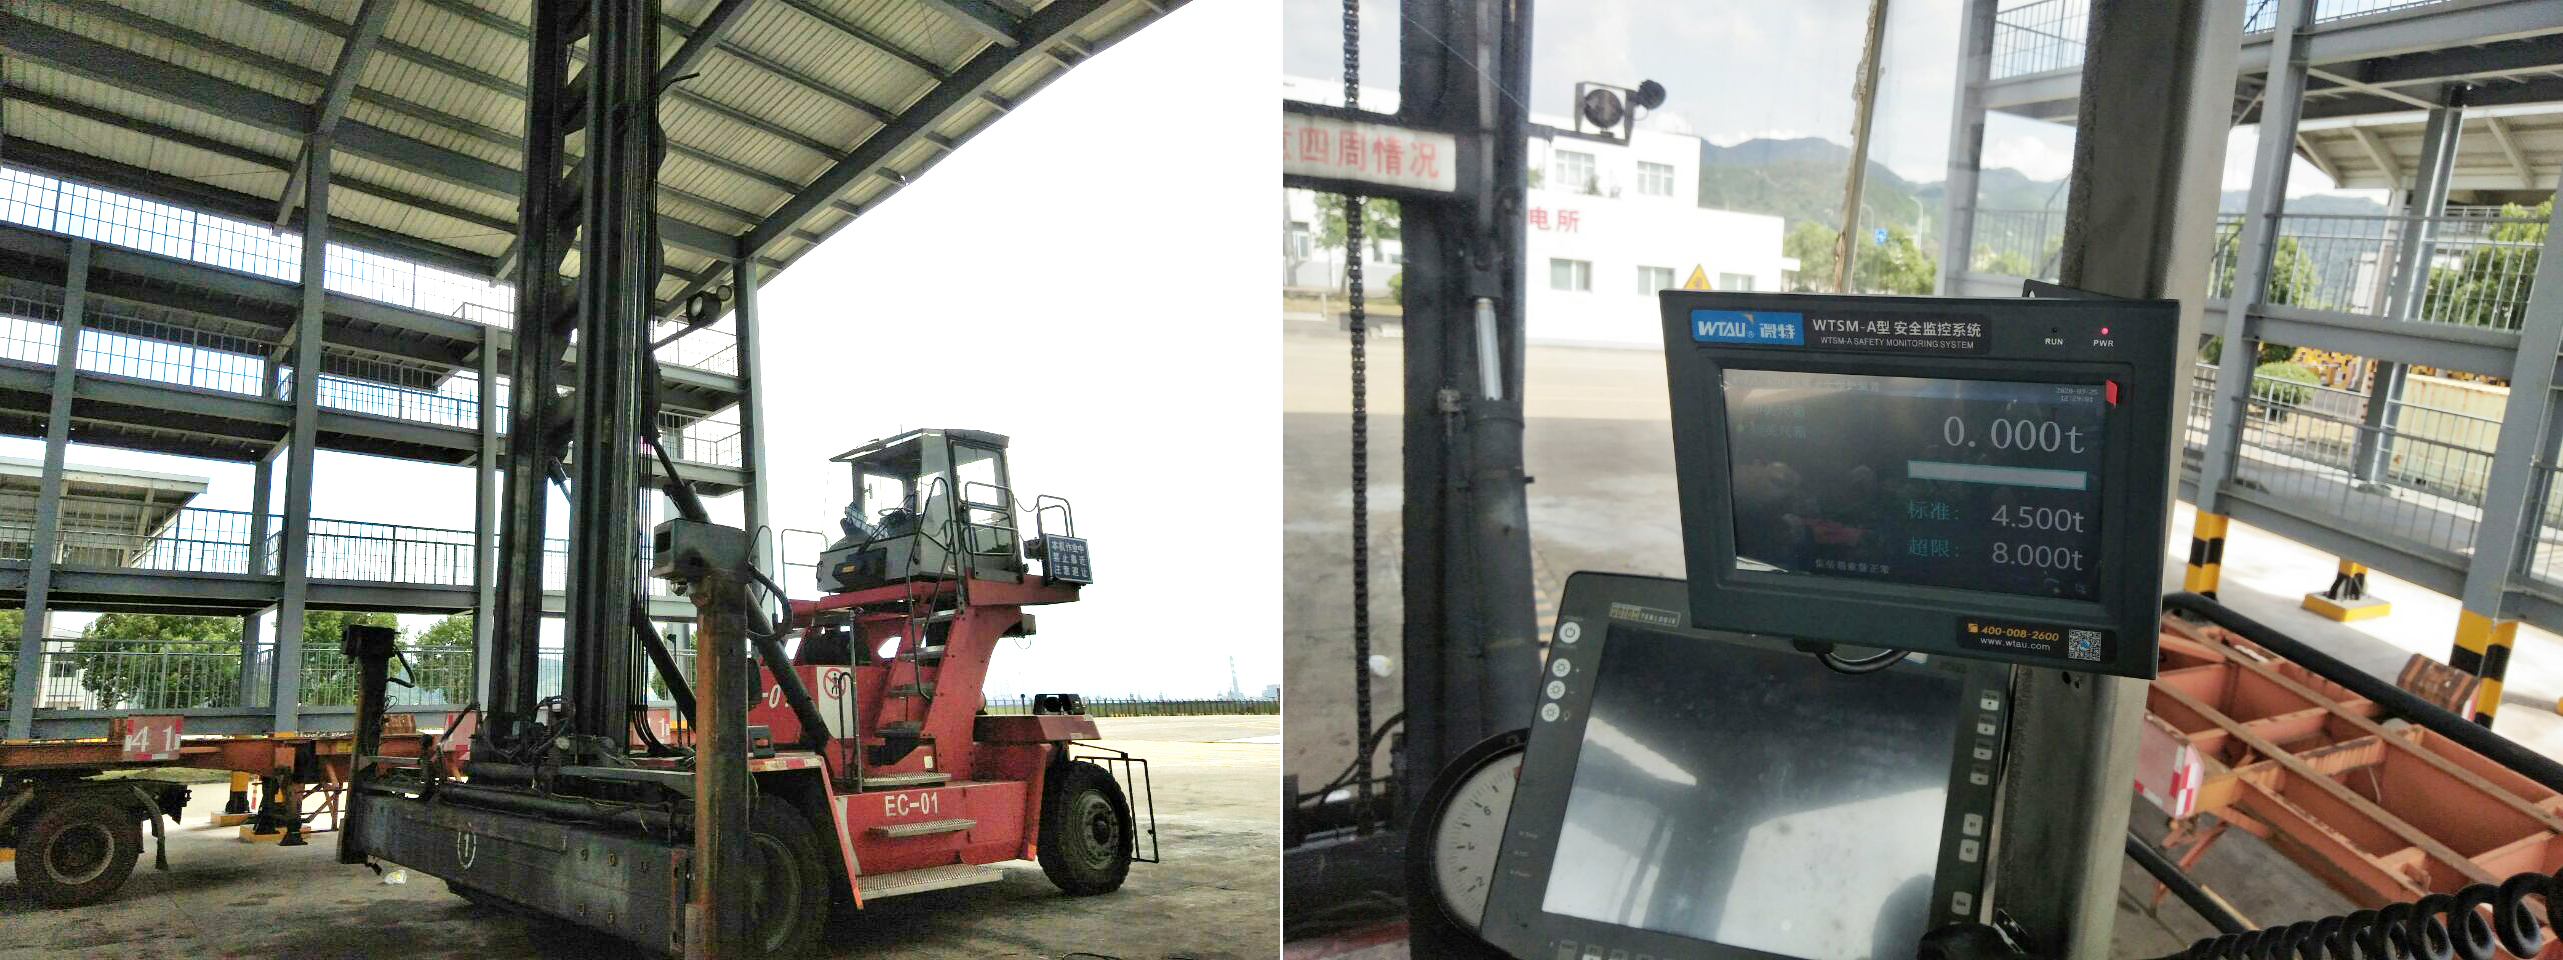 Installed wtsm-a stacker hydraulic load monitoring system display interface